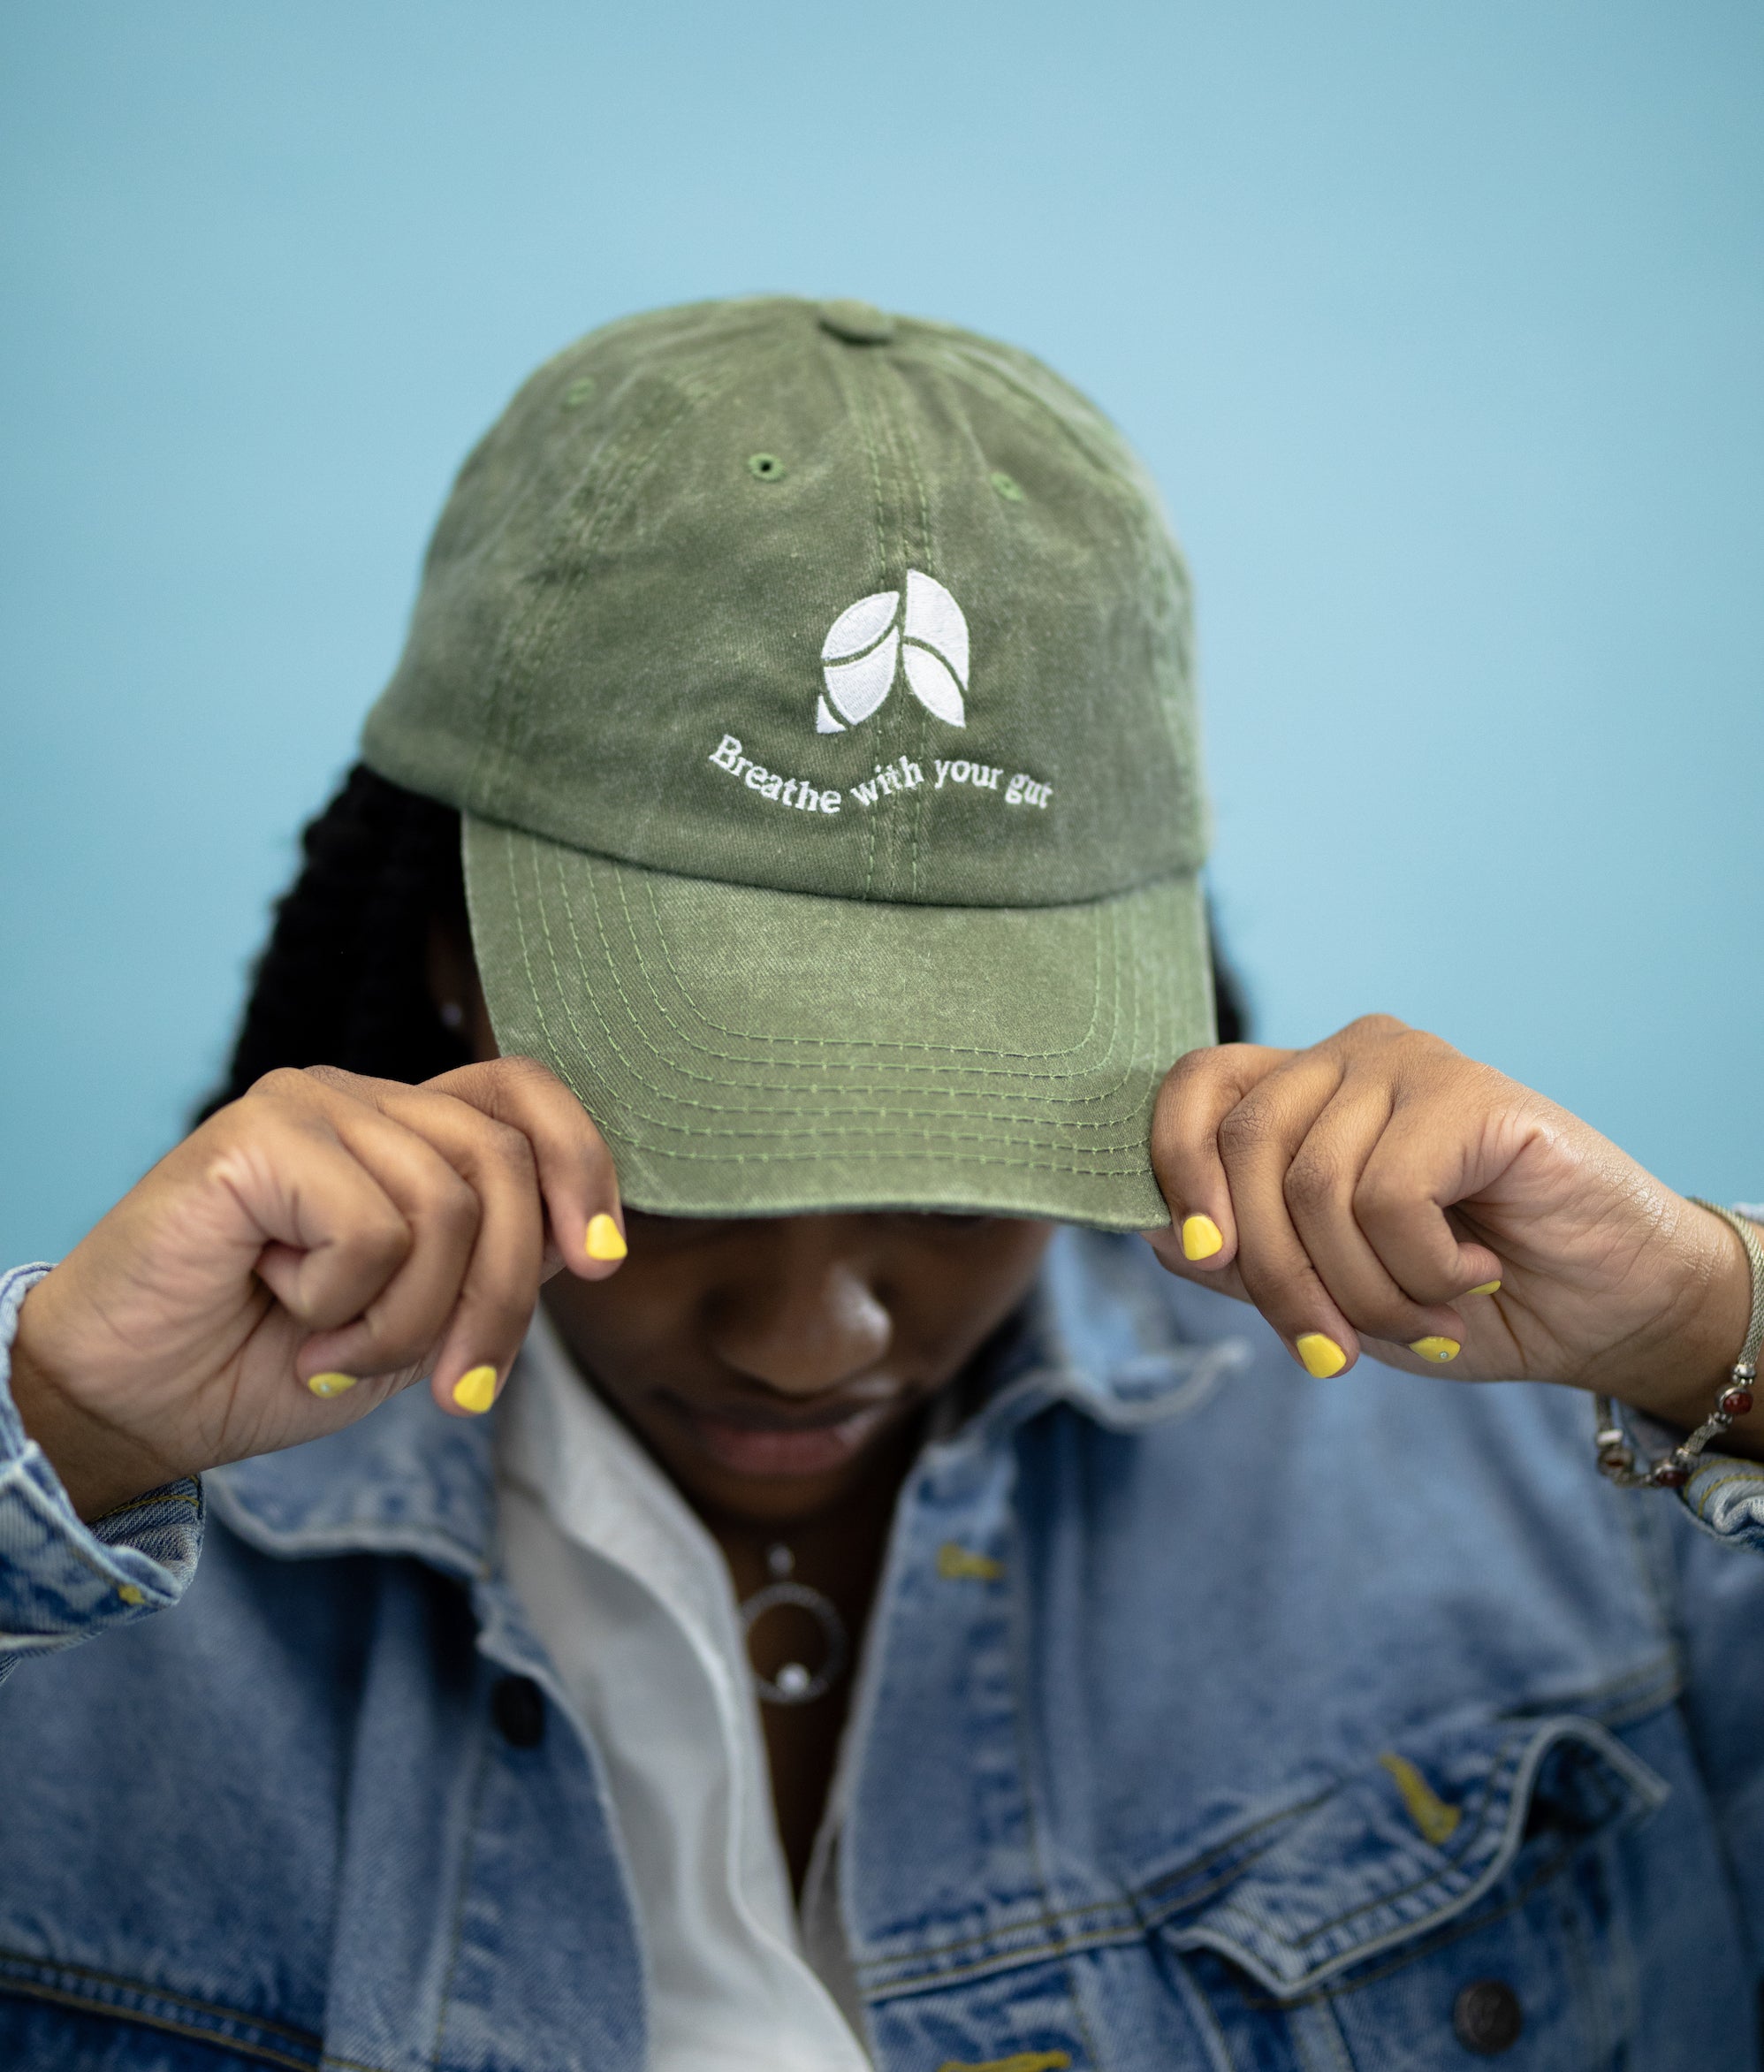 ResBiotic® Limited Edition Hat